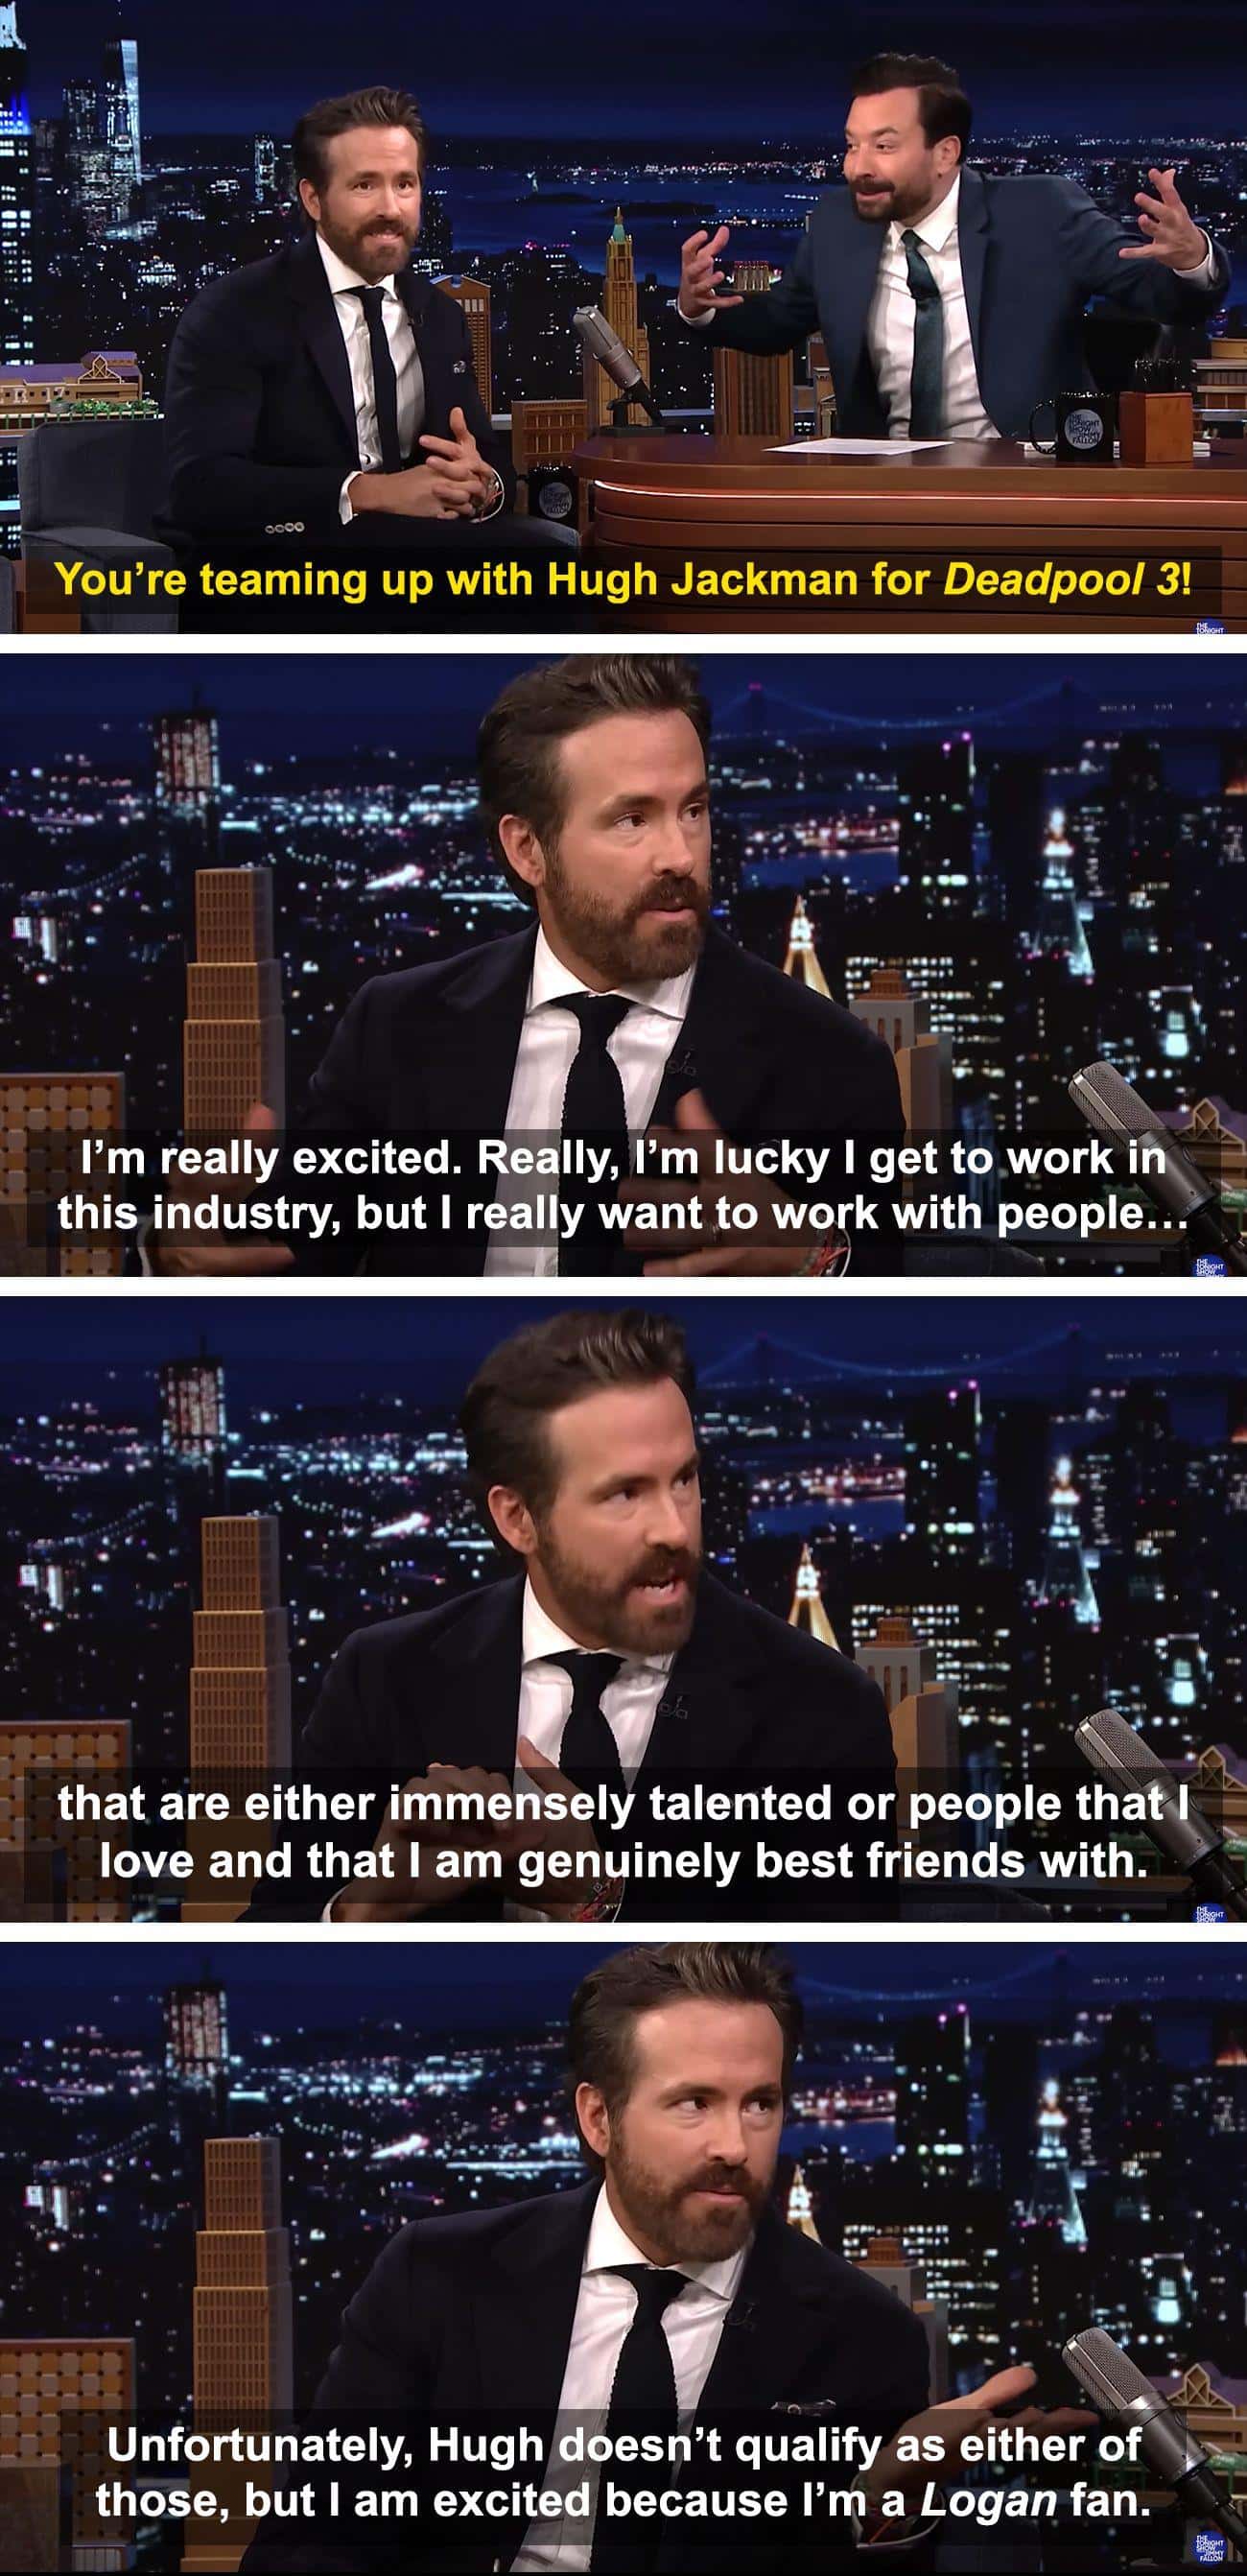 Ryan Reynolds Wants To Work With People He Likes